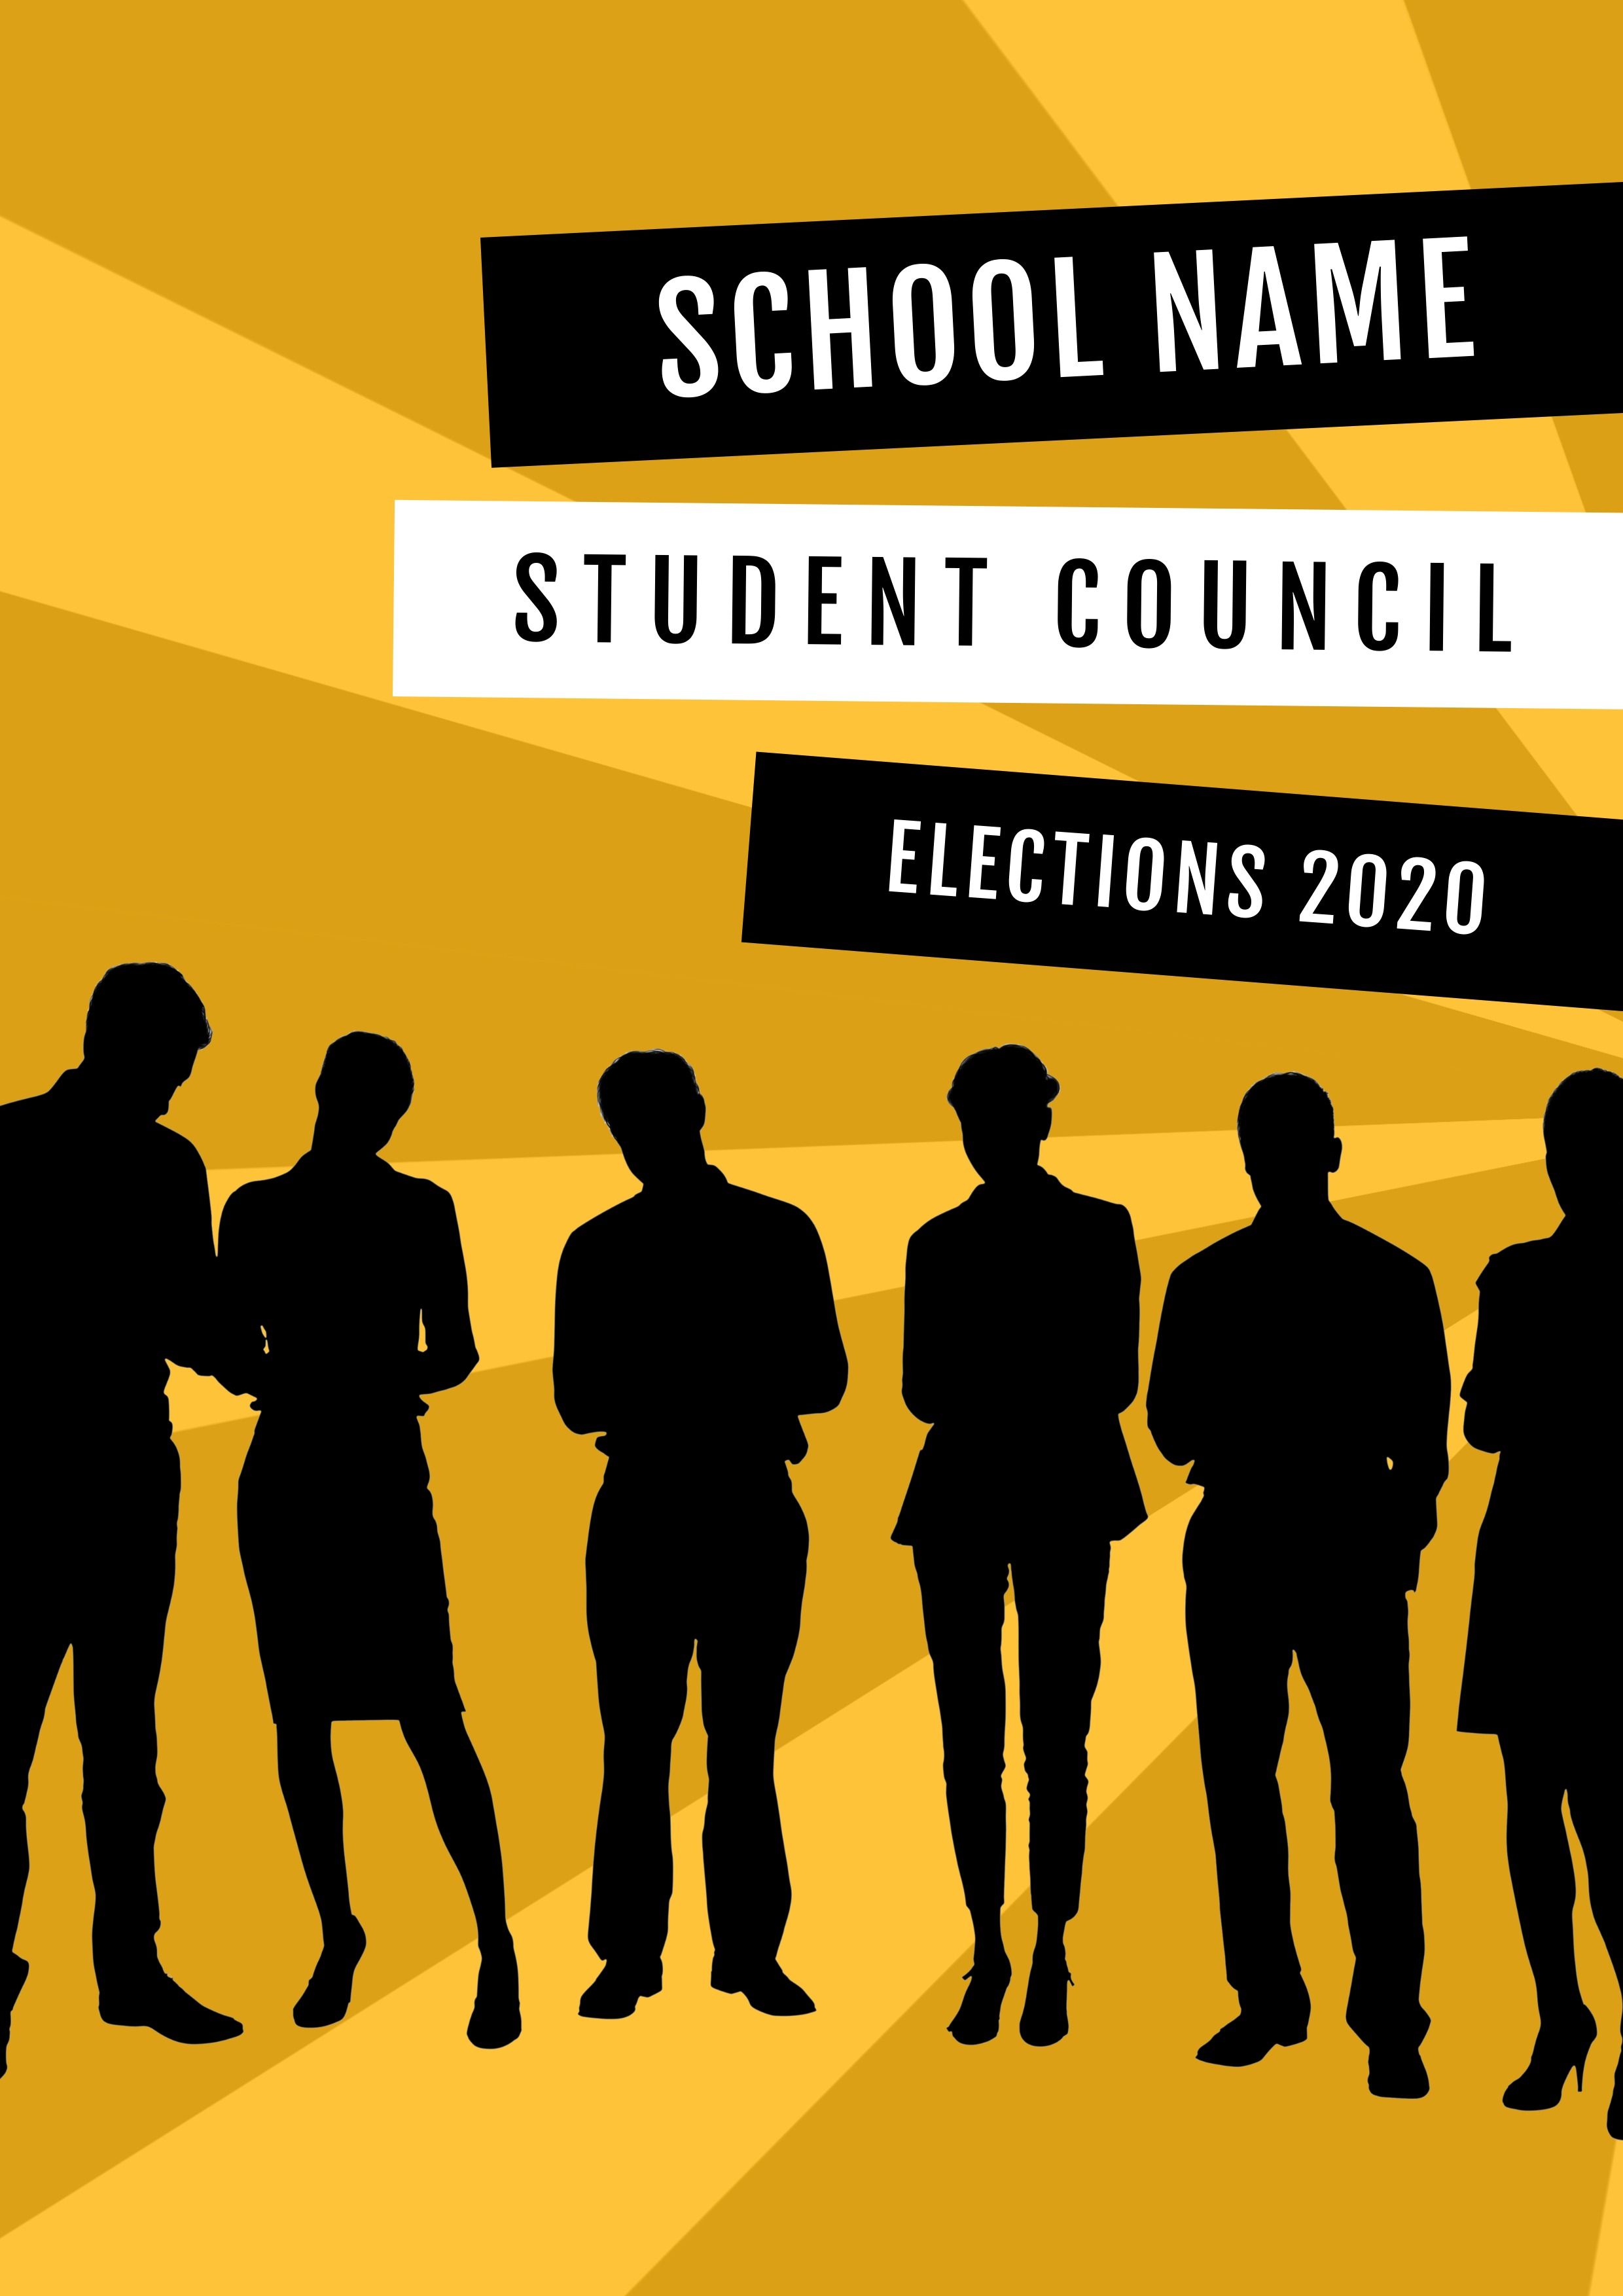 Student council election poster black and yellow - How to design clever student council posters, 30 ideas to boost your creativity - Image